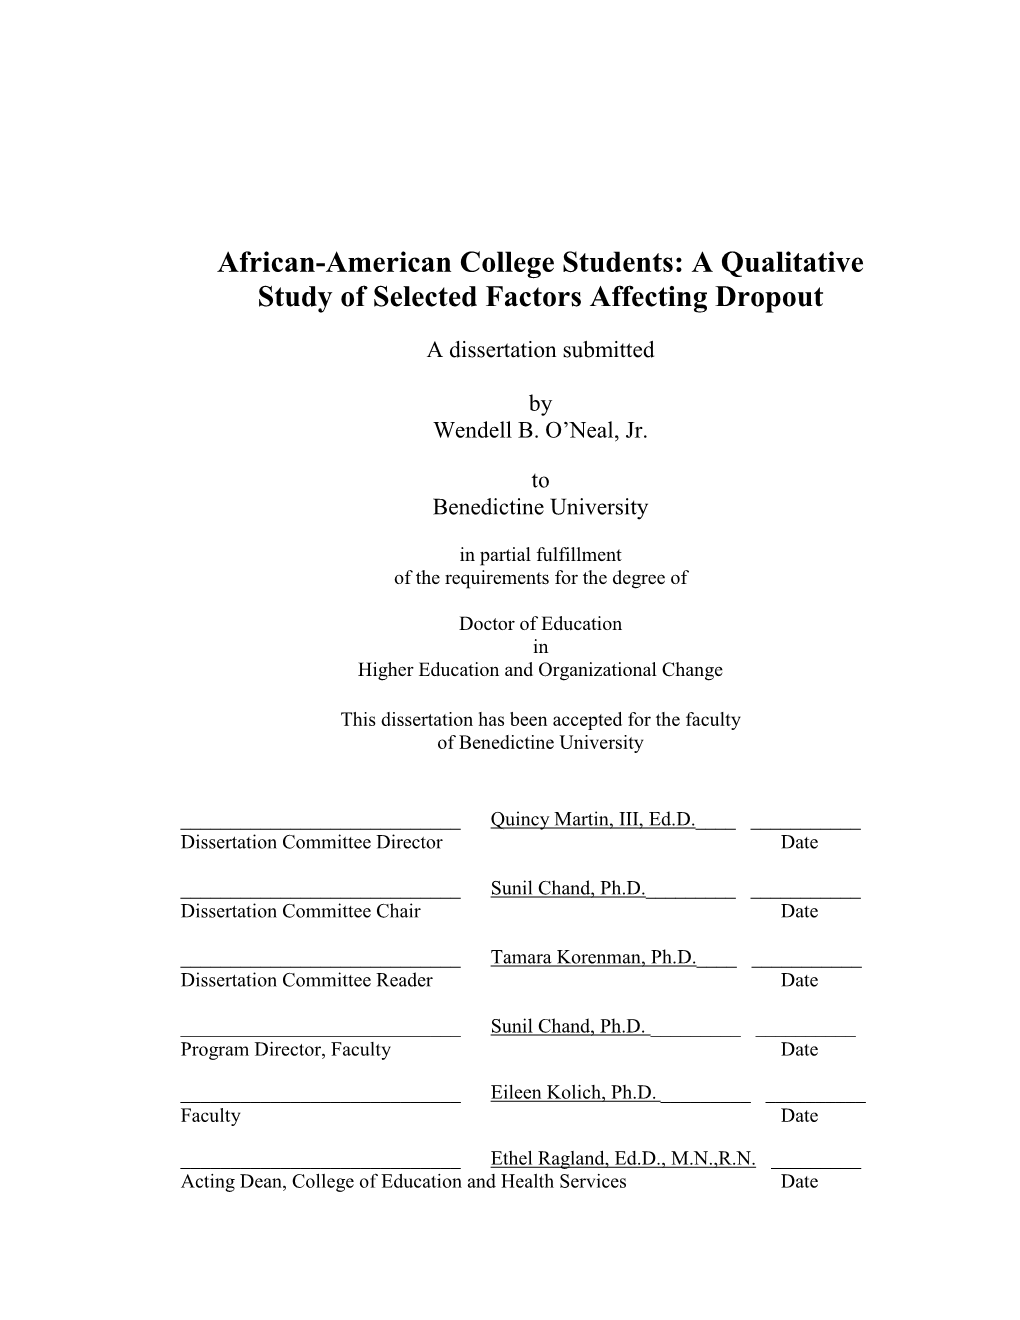 African-American College Students: a Qualitative Study of Selected Factors Affecting Dropout